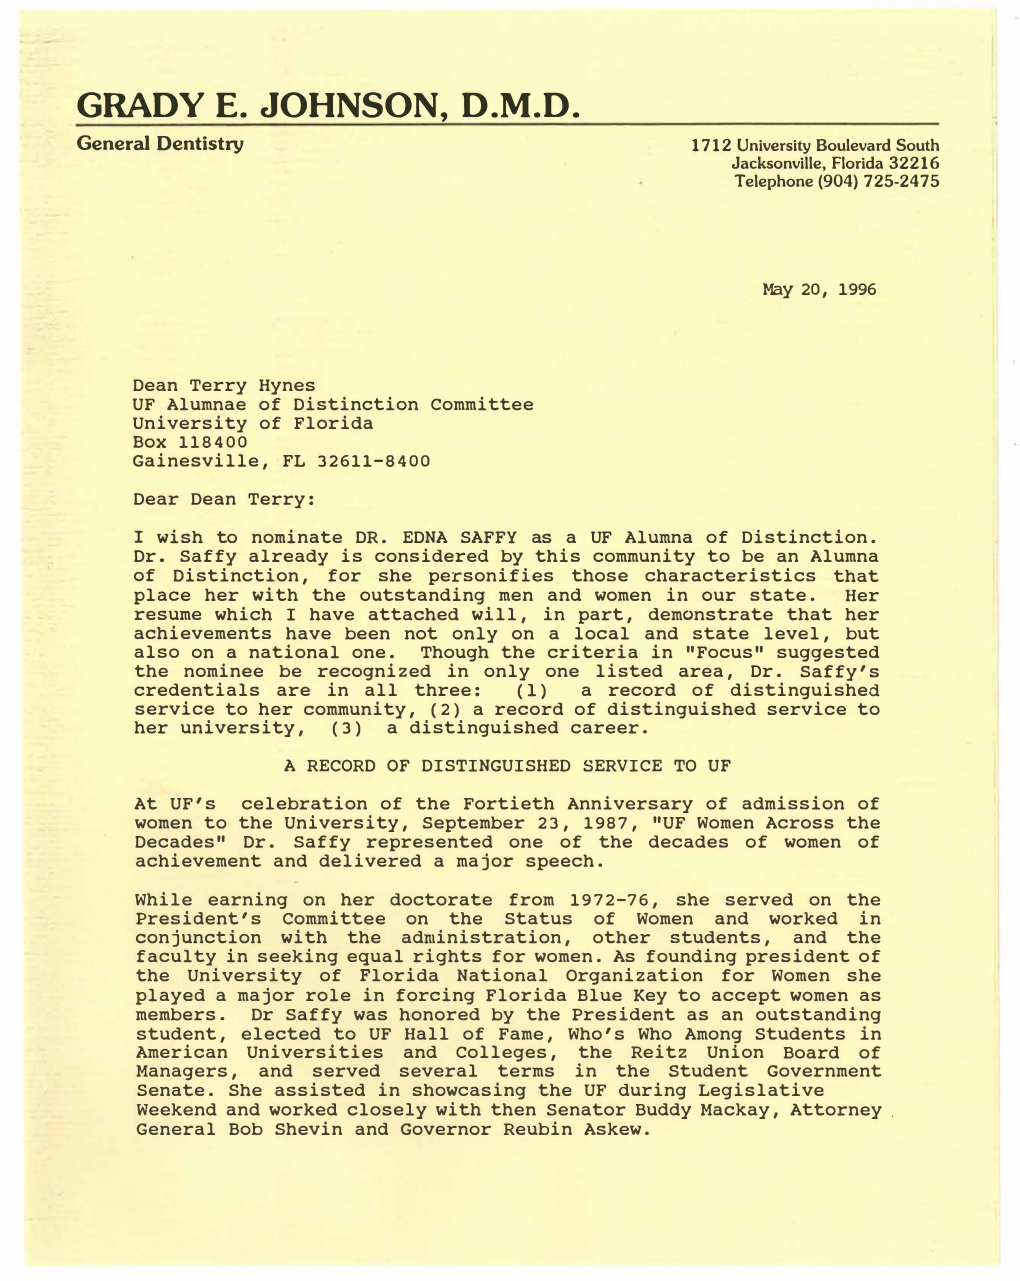 May 20, 1996, Letter of Nomination